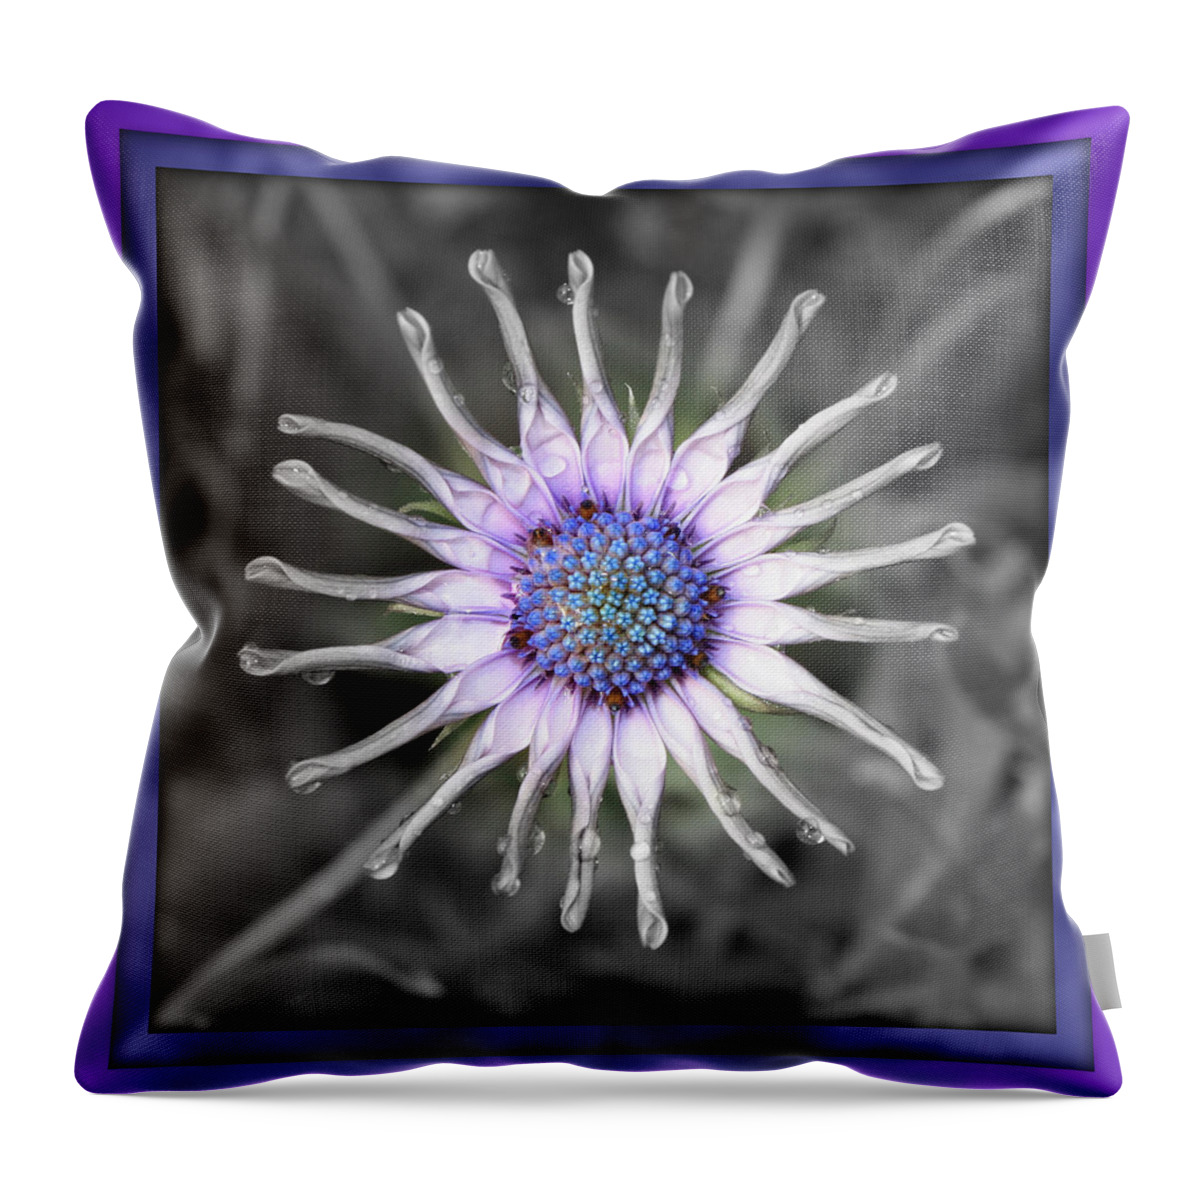 Digital Art Throw Pillow featuring the photograph Joy Within by Carol Groenen